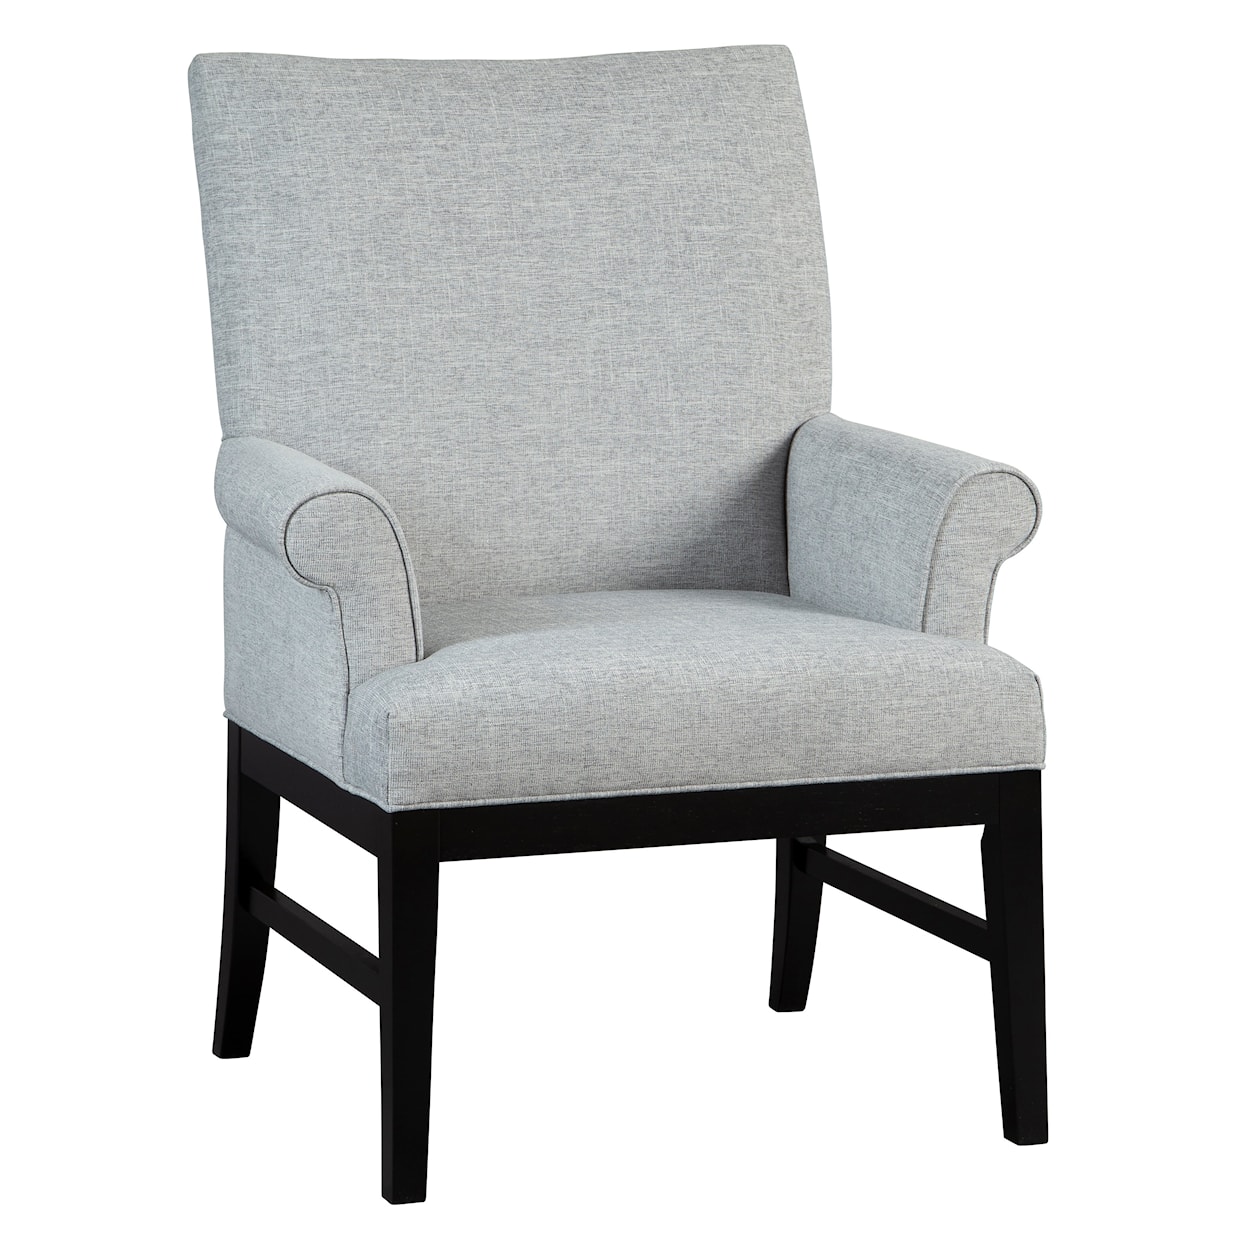 Hekman Upholstery Callie Accent Chair